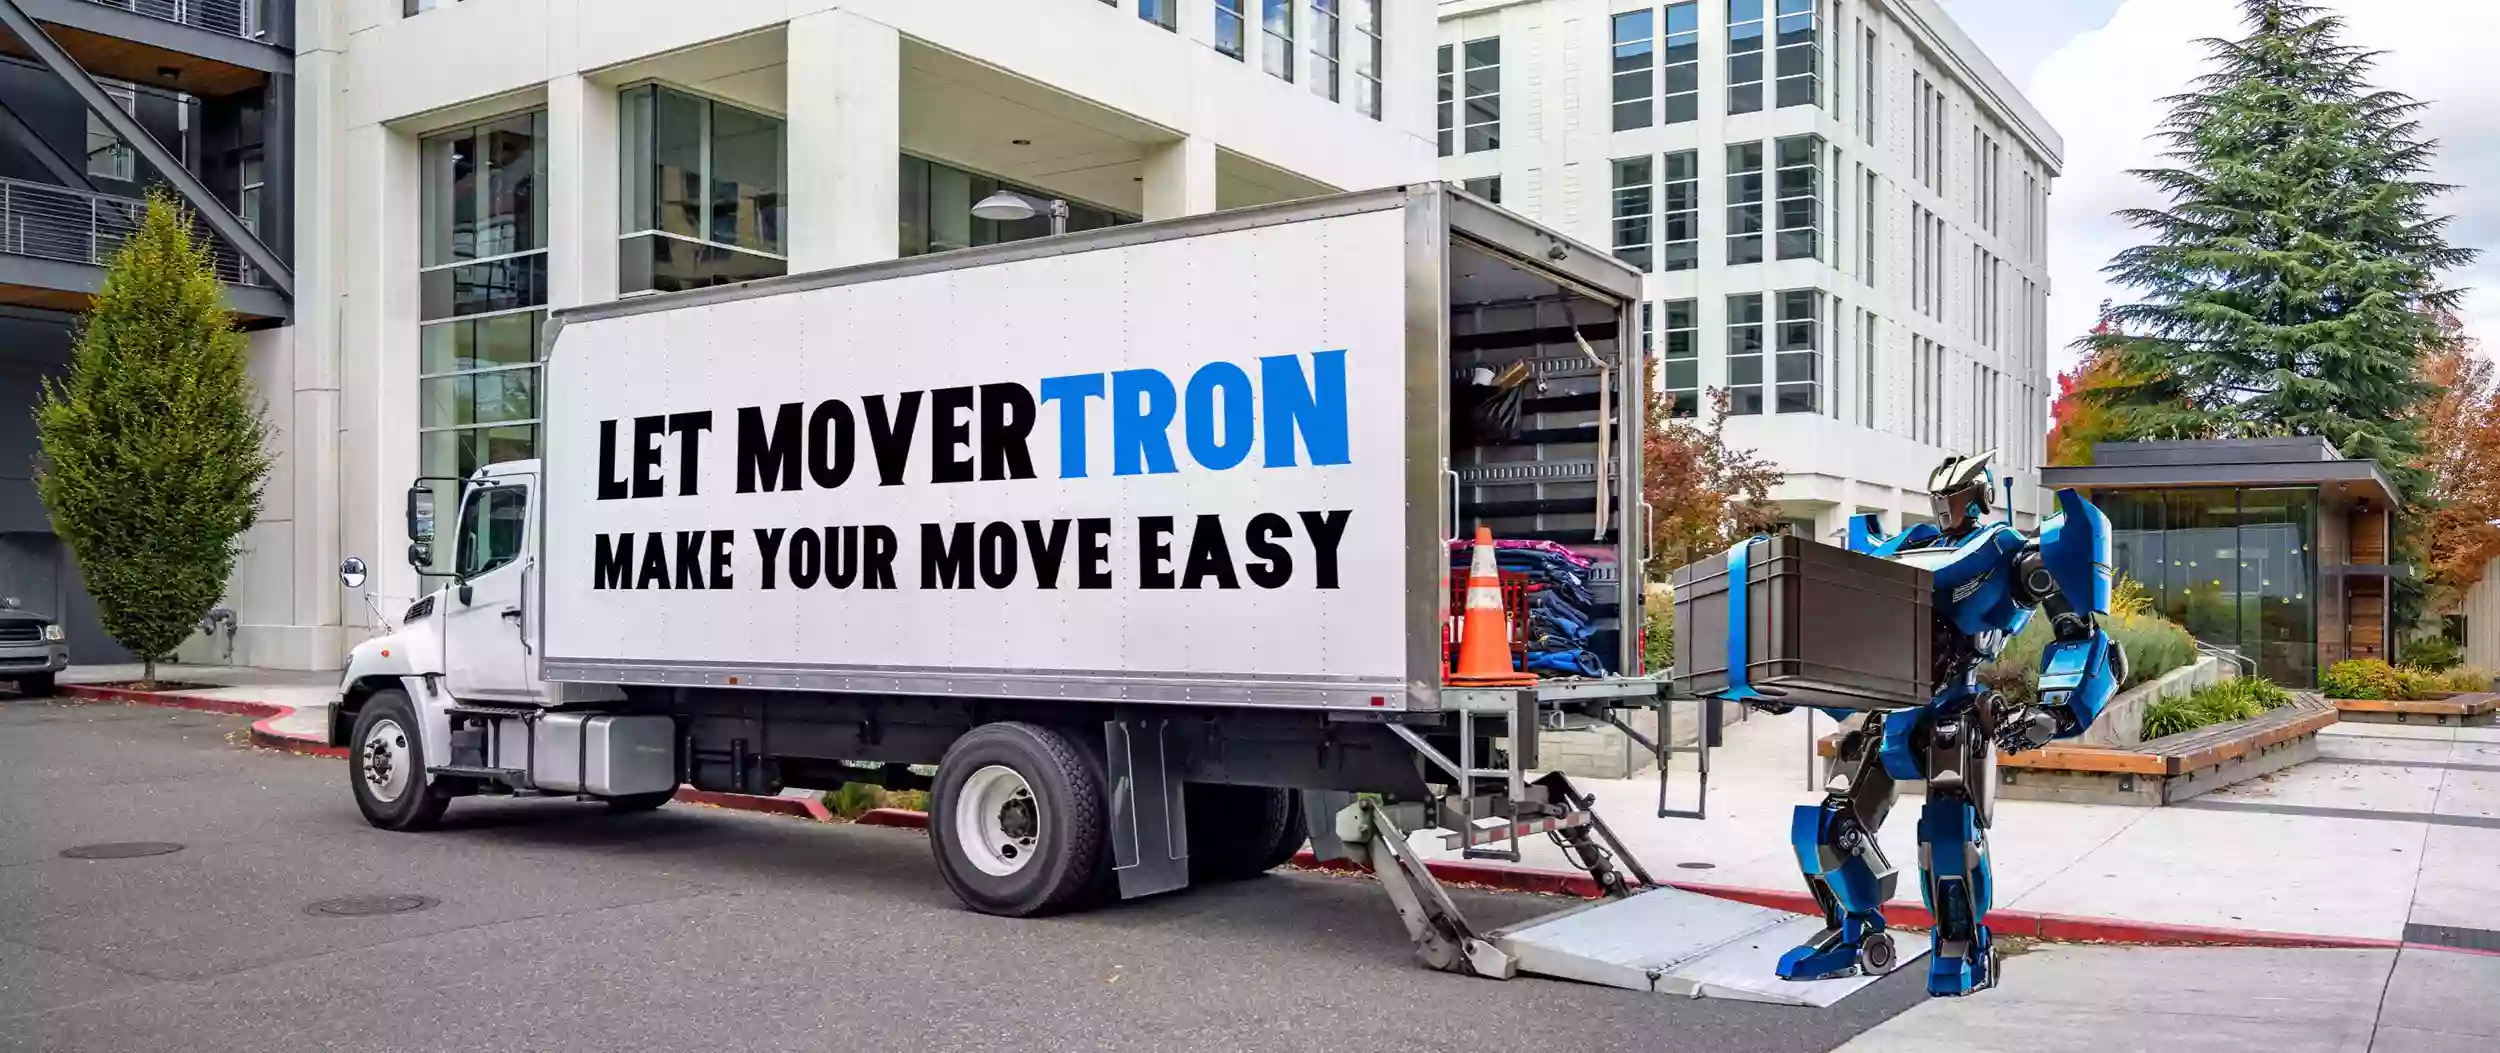 MoverTron Moving